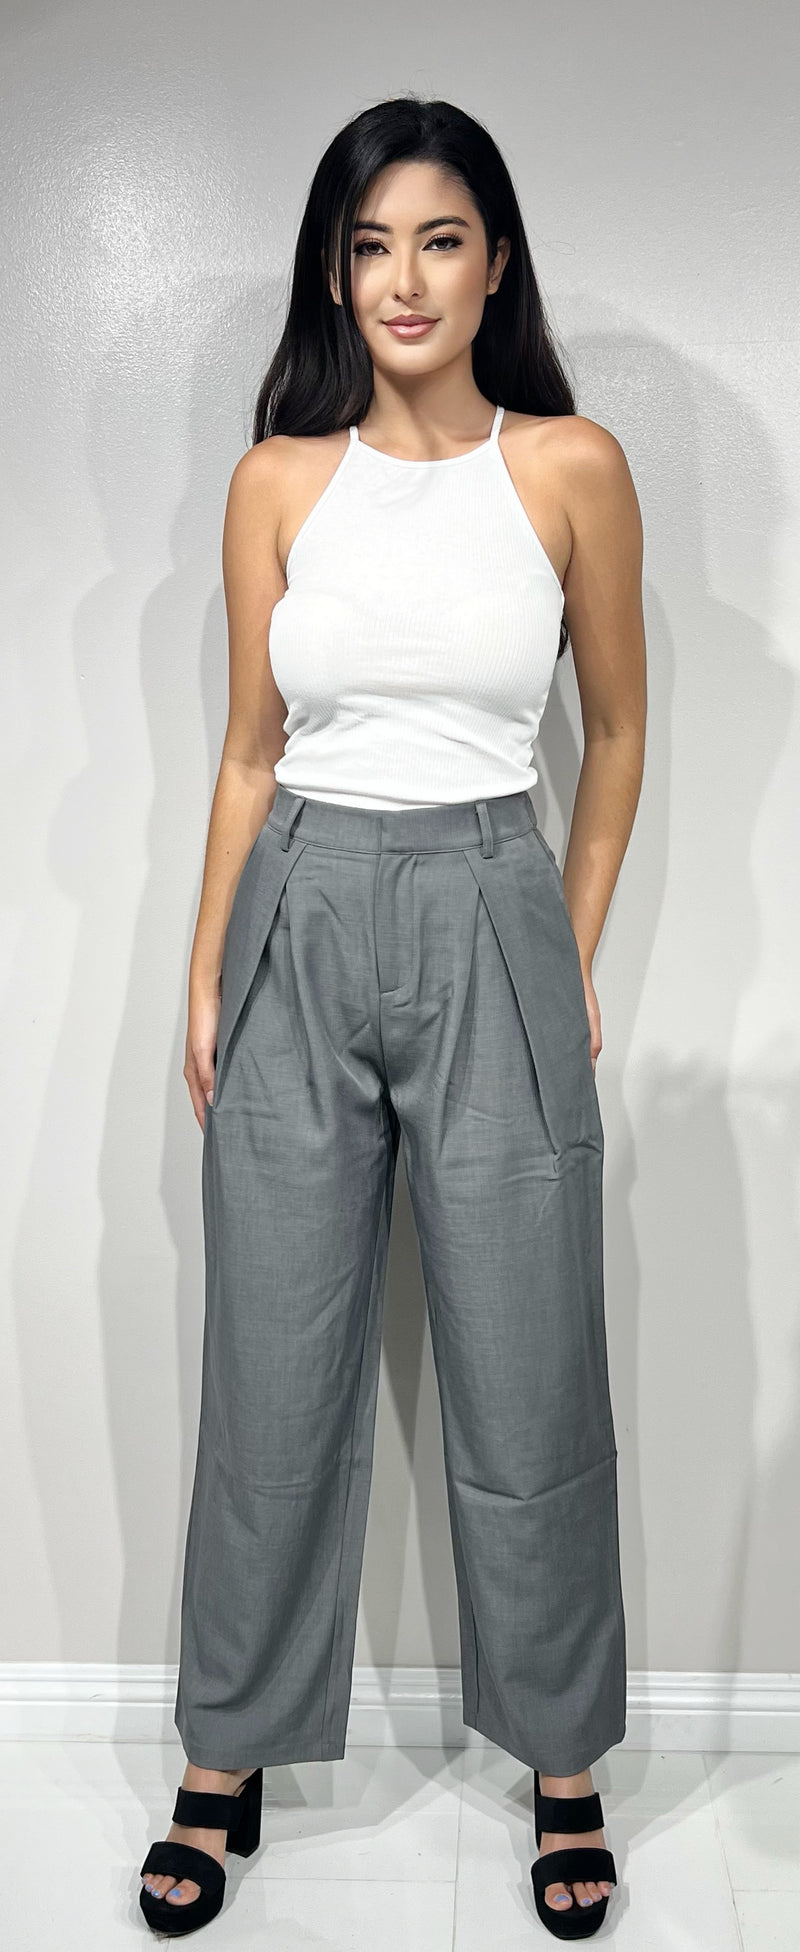 Jeans Warehouse Hawaii - SOLID WOVEN PANTS - ELASTIC BACK PANTS | By VERY J